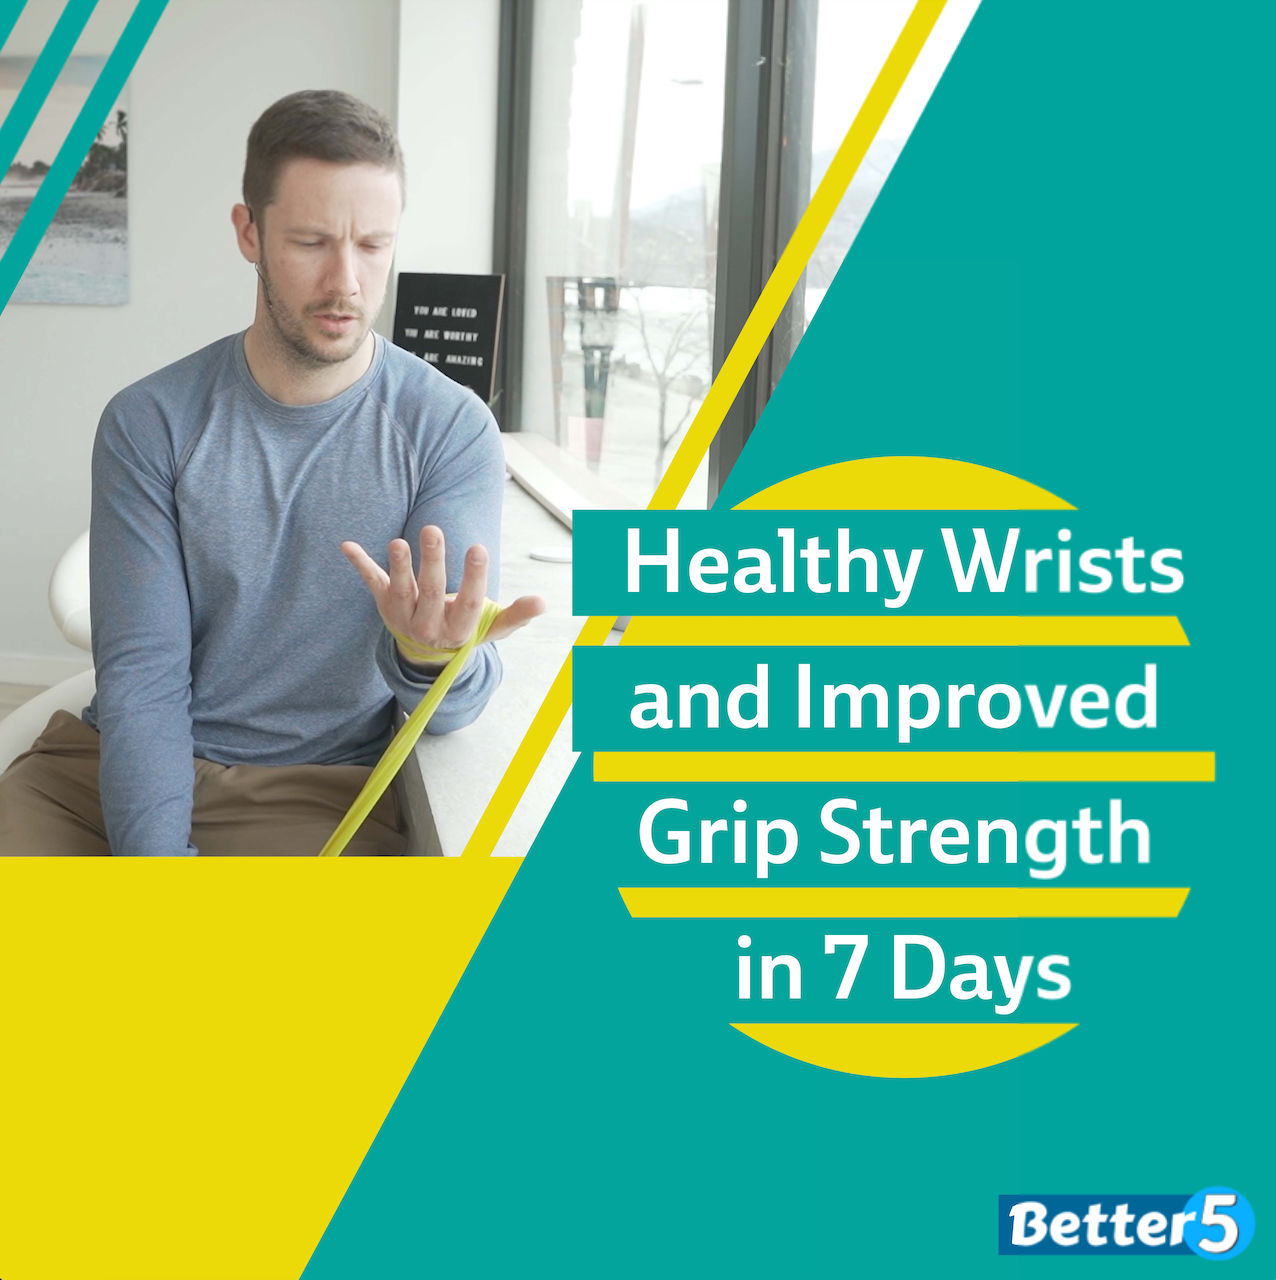 Healthy Wrists and Improved Grip Strength in 7 Days Digital Class